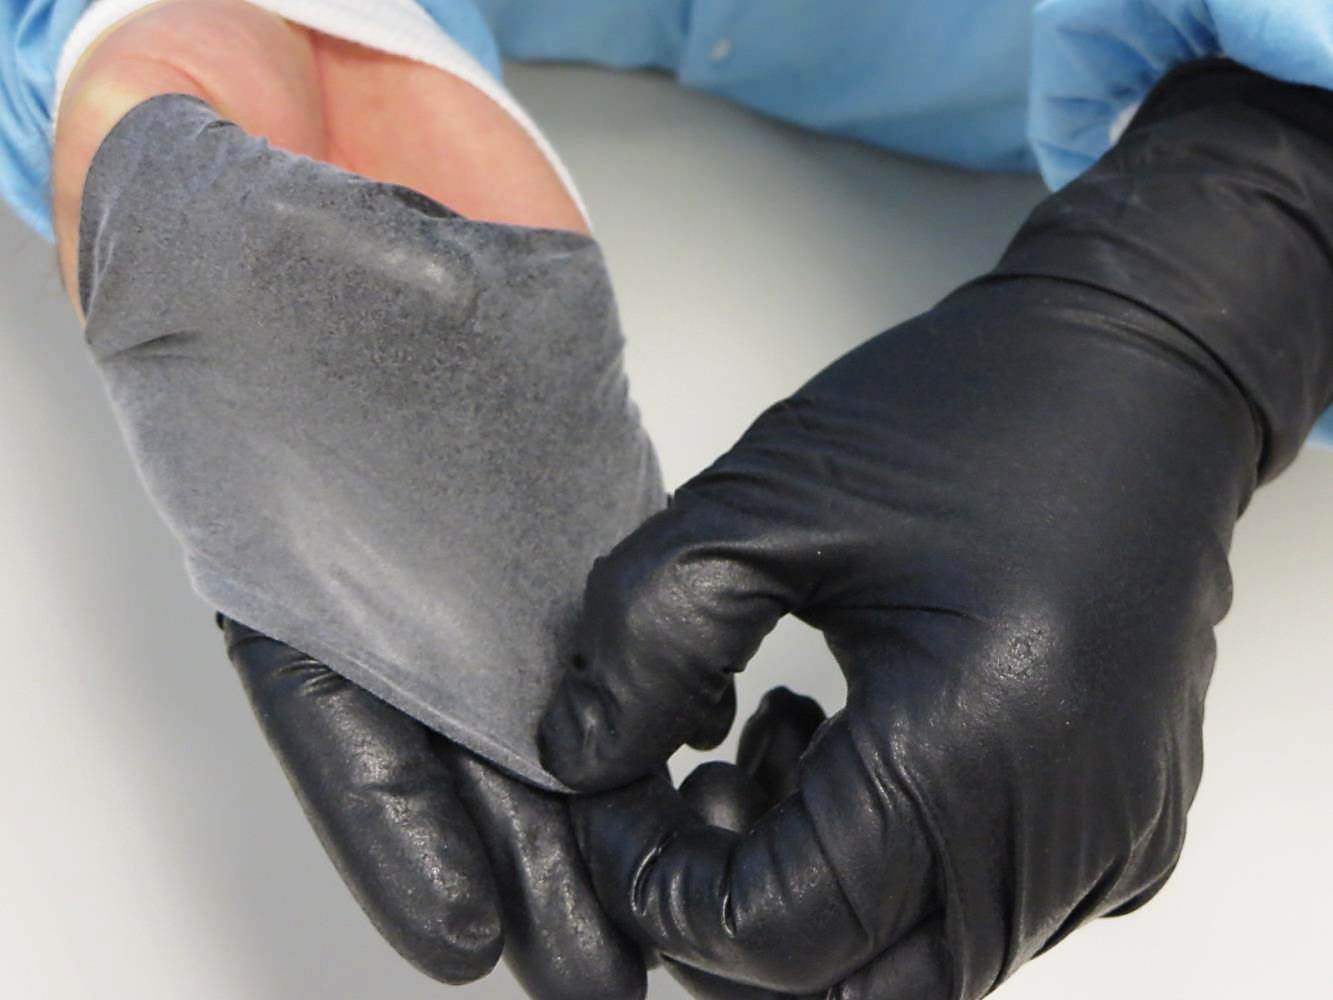 Better for the planet, SW® Sustainable Solutions MM-11BK MegaMan® EcoTek® DriTek® Biodegradable 10.1-mil Black Powder-Free Latex-Free Nitrile Exam Gloves pushes the boundaries of single-use hand protection performance, with new levels of abrasion resistance, sweat management, and comfort that deliver in exceedingly severe environments. Proven to resist dangerous fatal toxins and chemotherapy drugs.